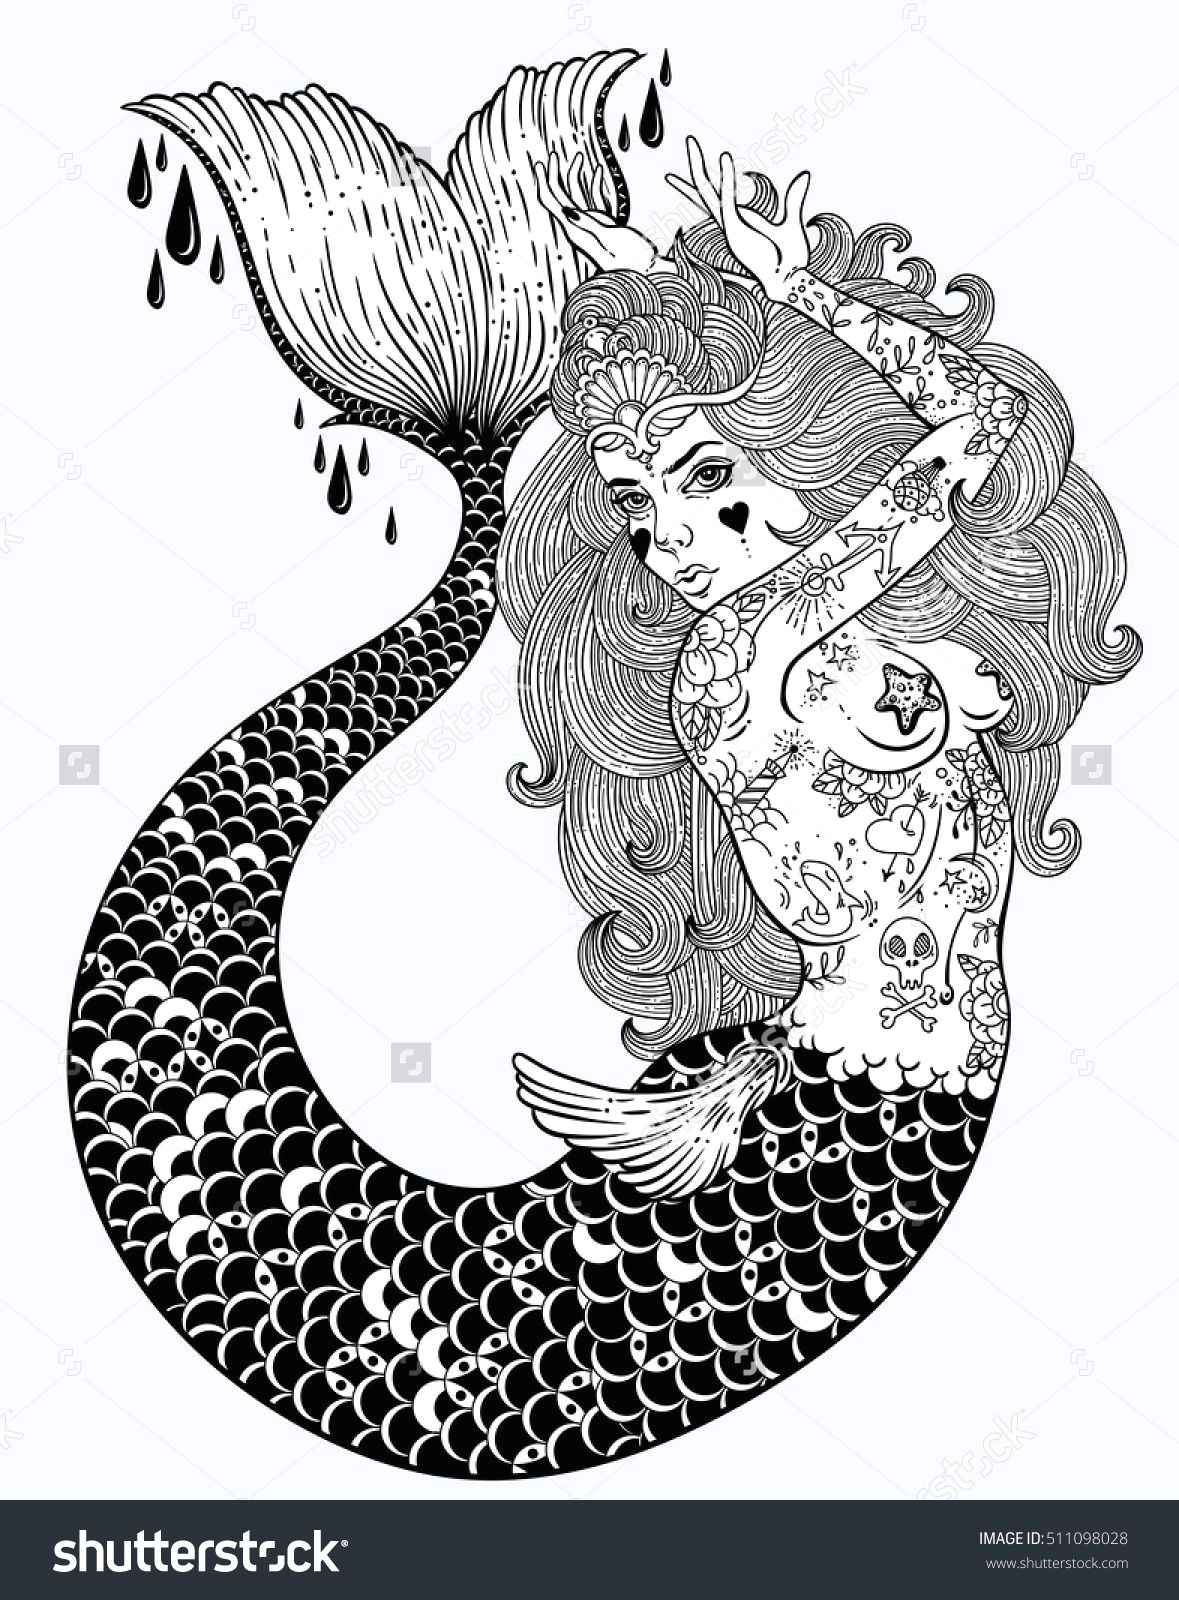 outstanding hand draw work of a tattoed body mermaid in new old school style template for invitation scrap booking print for t shirt tattoo art